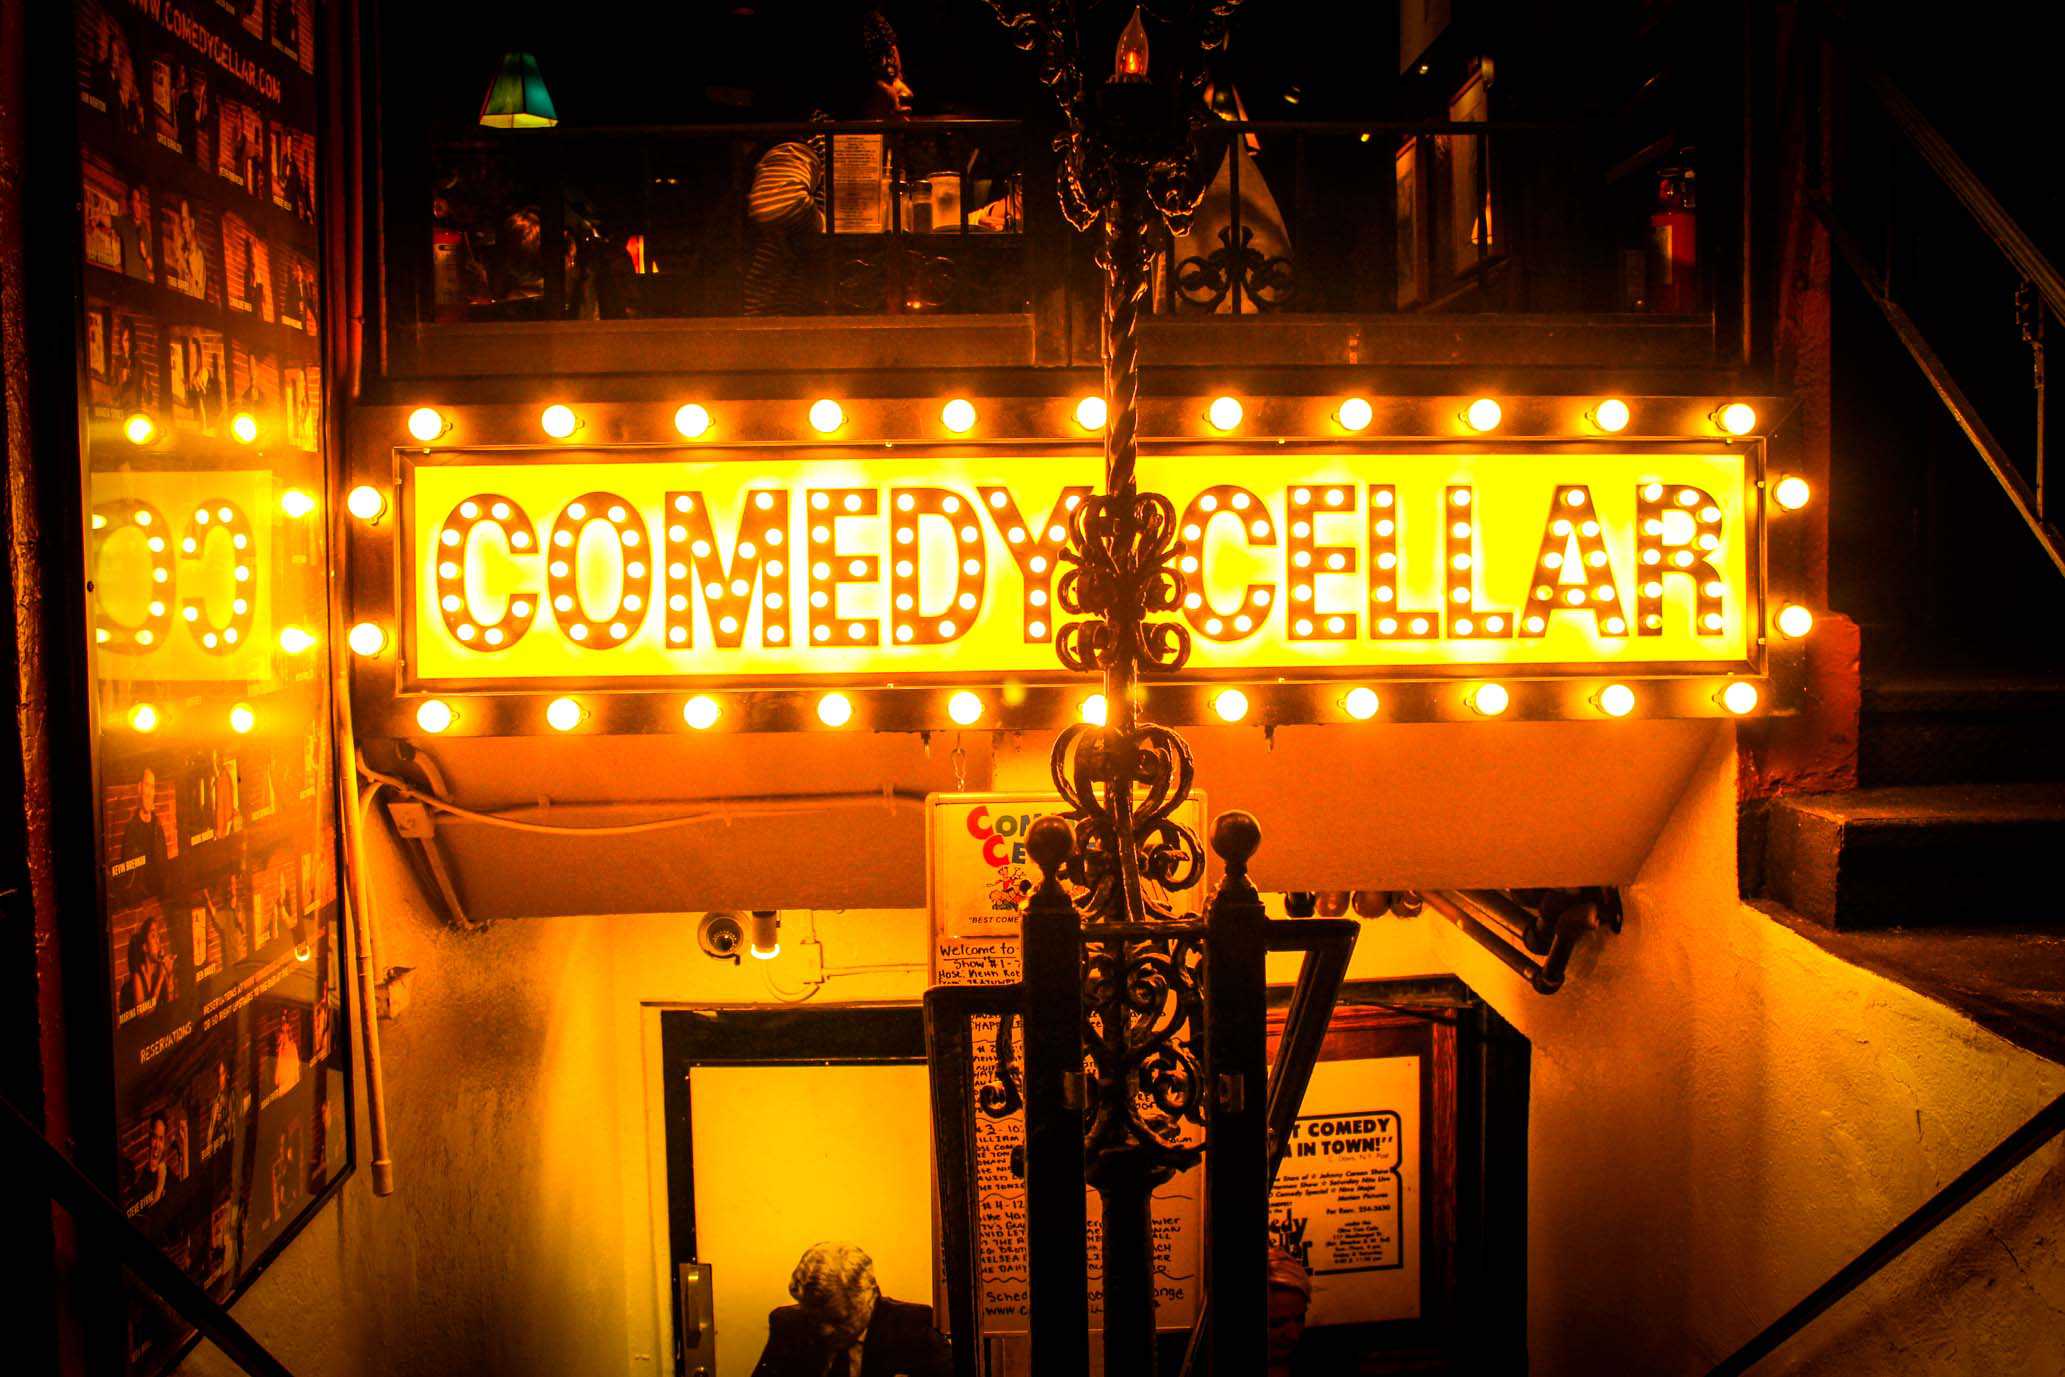 Night lights of the Comedy Cellar sign, Greenwich village New York City